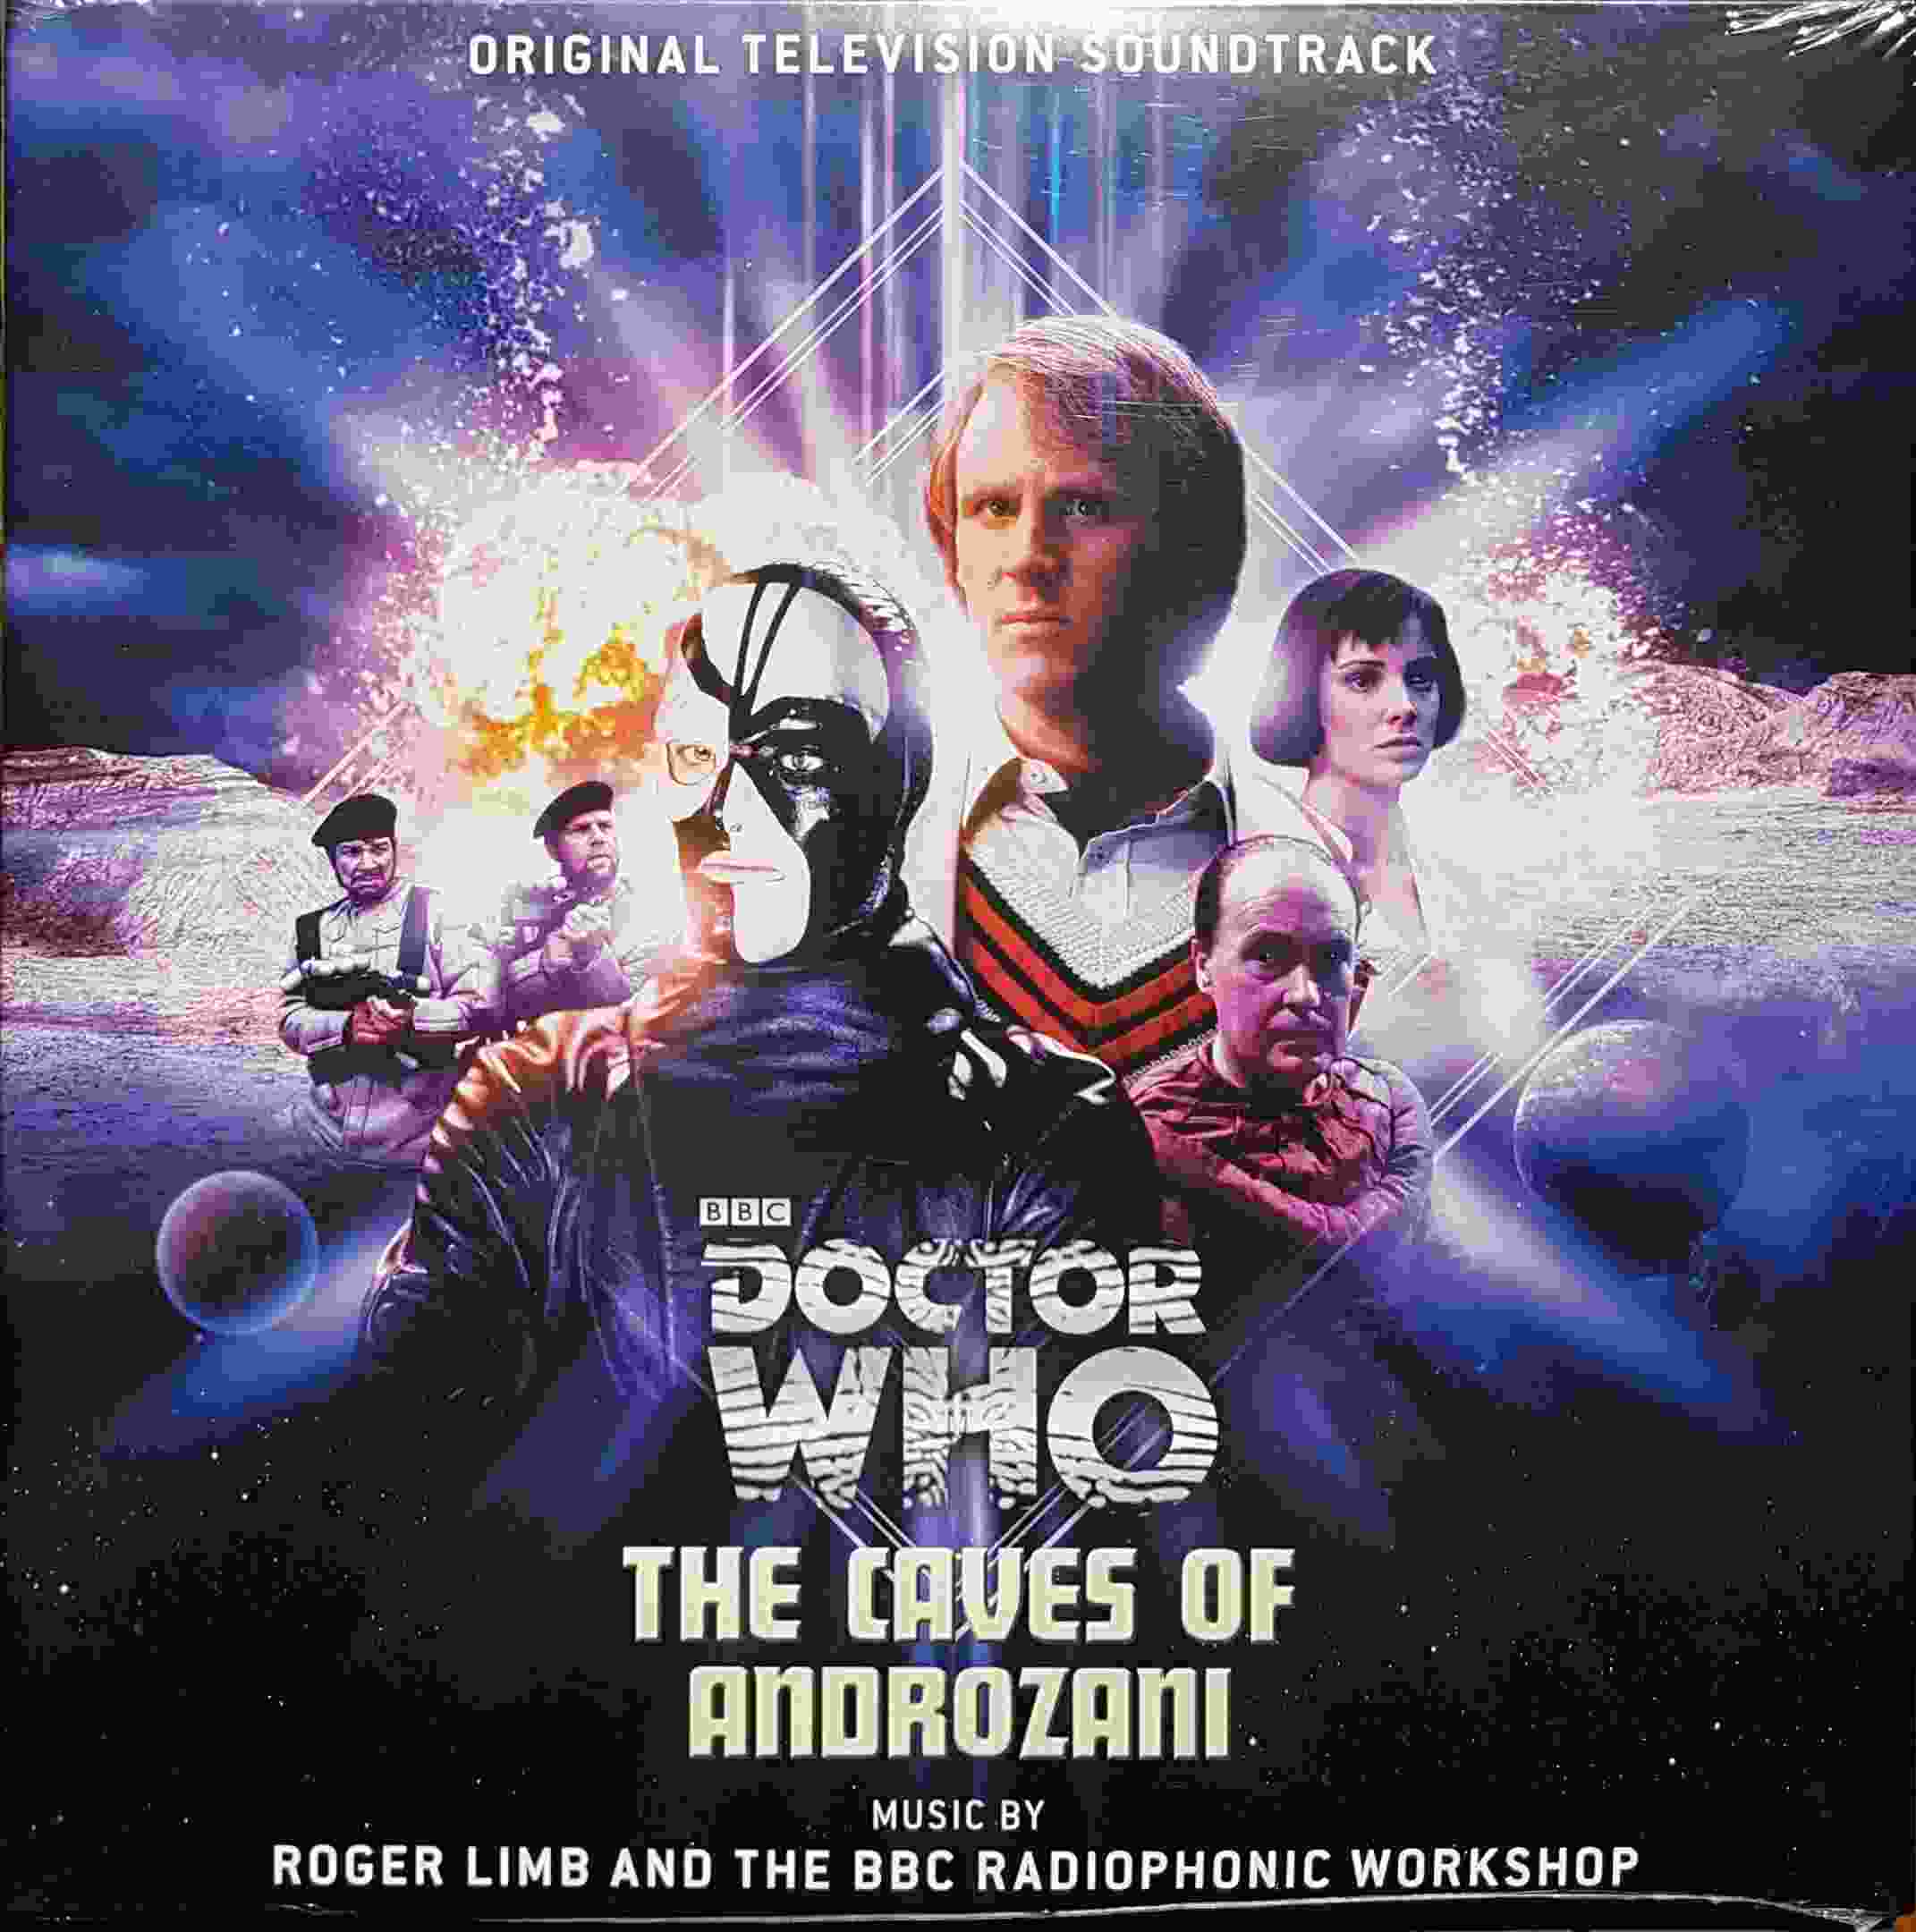 Picture of SILLP 1370 Doctor Who - The caves of Androzani by artist Roger Limb / BBC Radiophonic Workshop from the BBC records and Tapes library